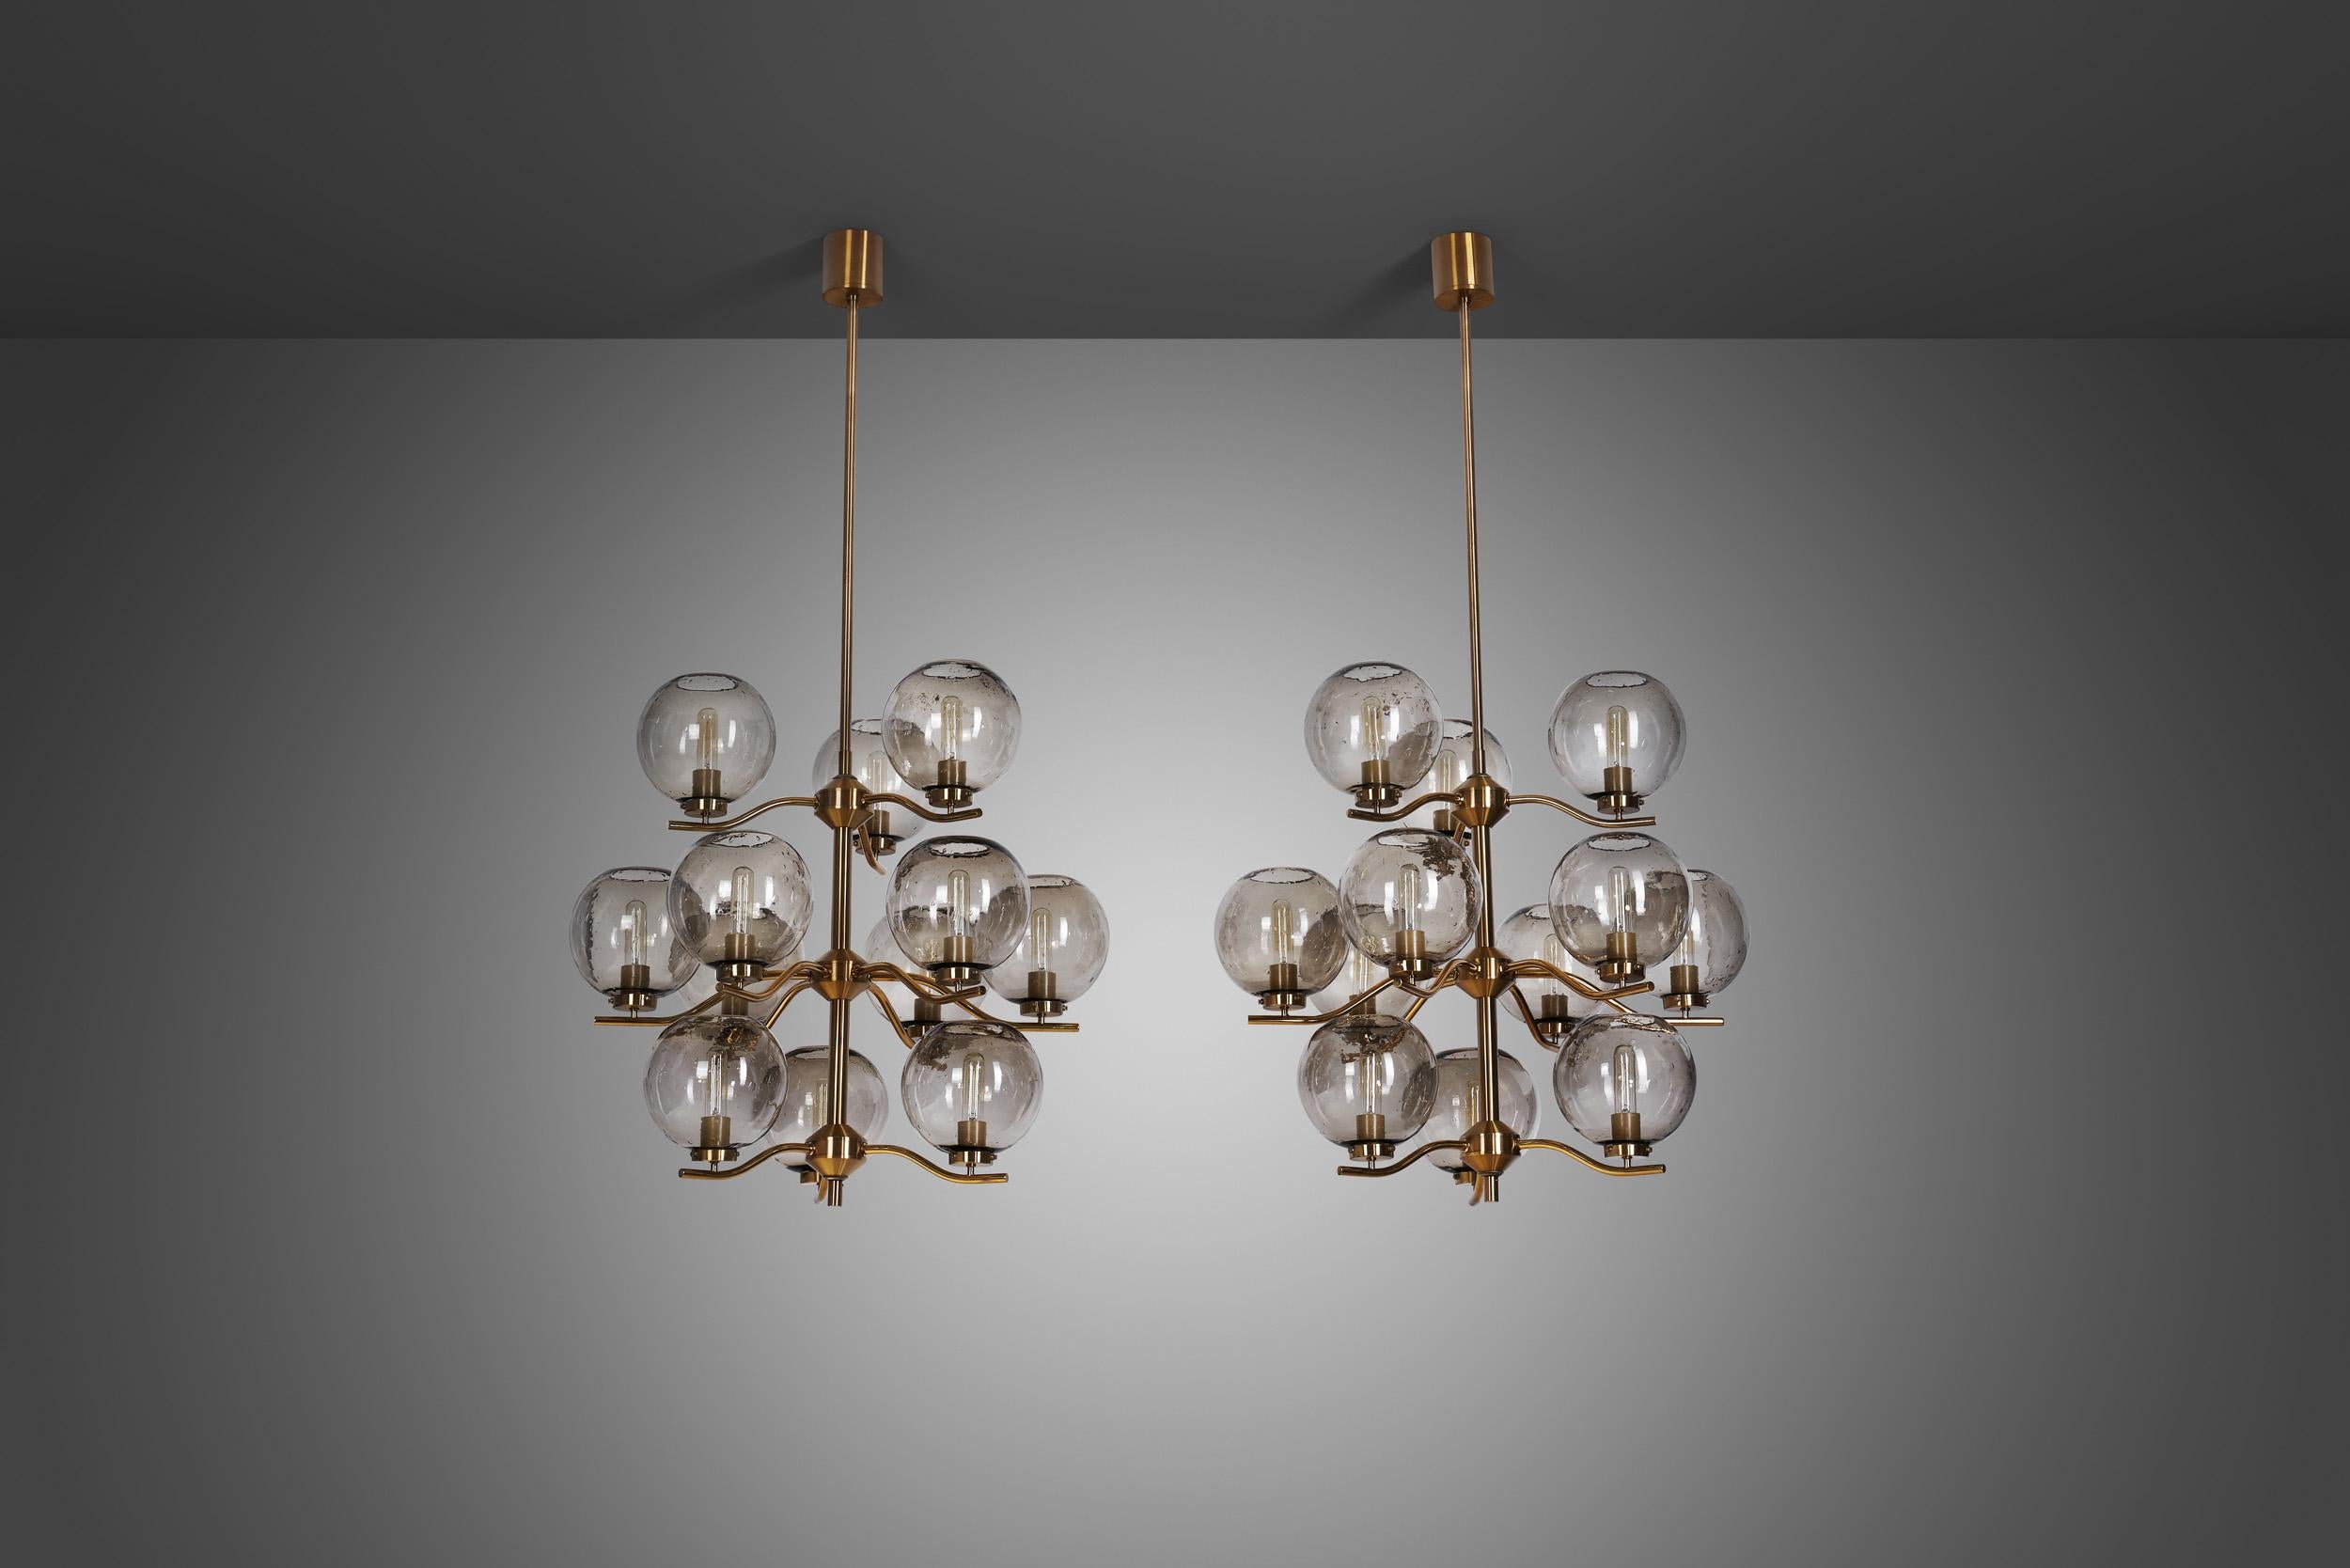 Holger Johansson Chandeliers with 12 Smoked Glass Shades, Sweden 1970s In Good Condition For Sale In Utrecht, NL